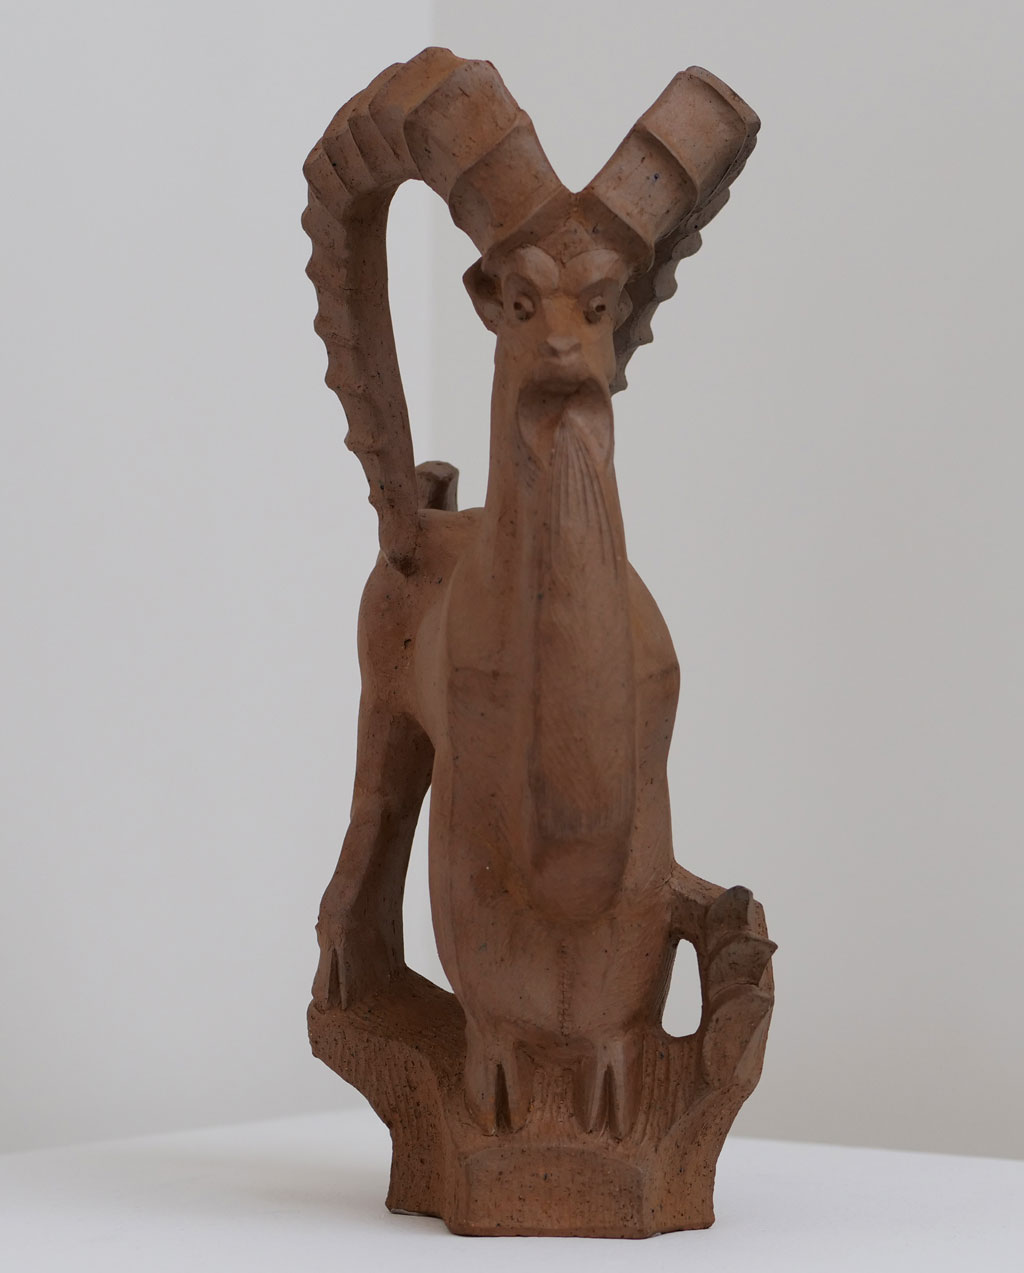 Betty Davenport Ford, Antelope, c. 1950, California Visionaries: Seminal Studio Craft, Featuring Works from the Forrest L. Merrill Collection